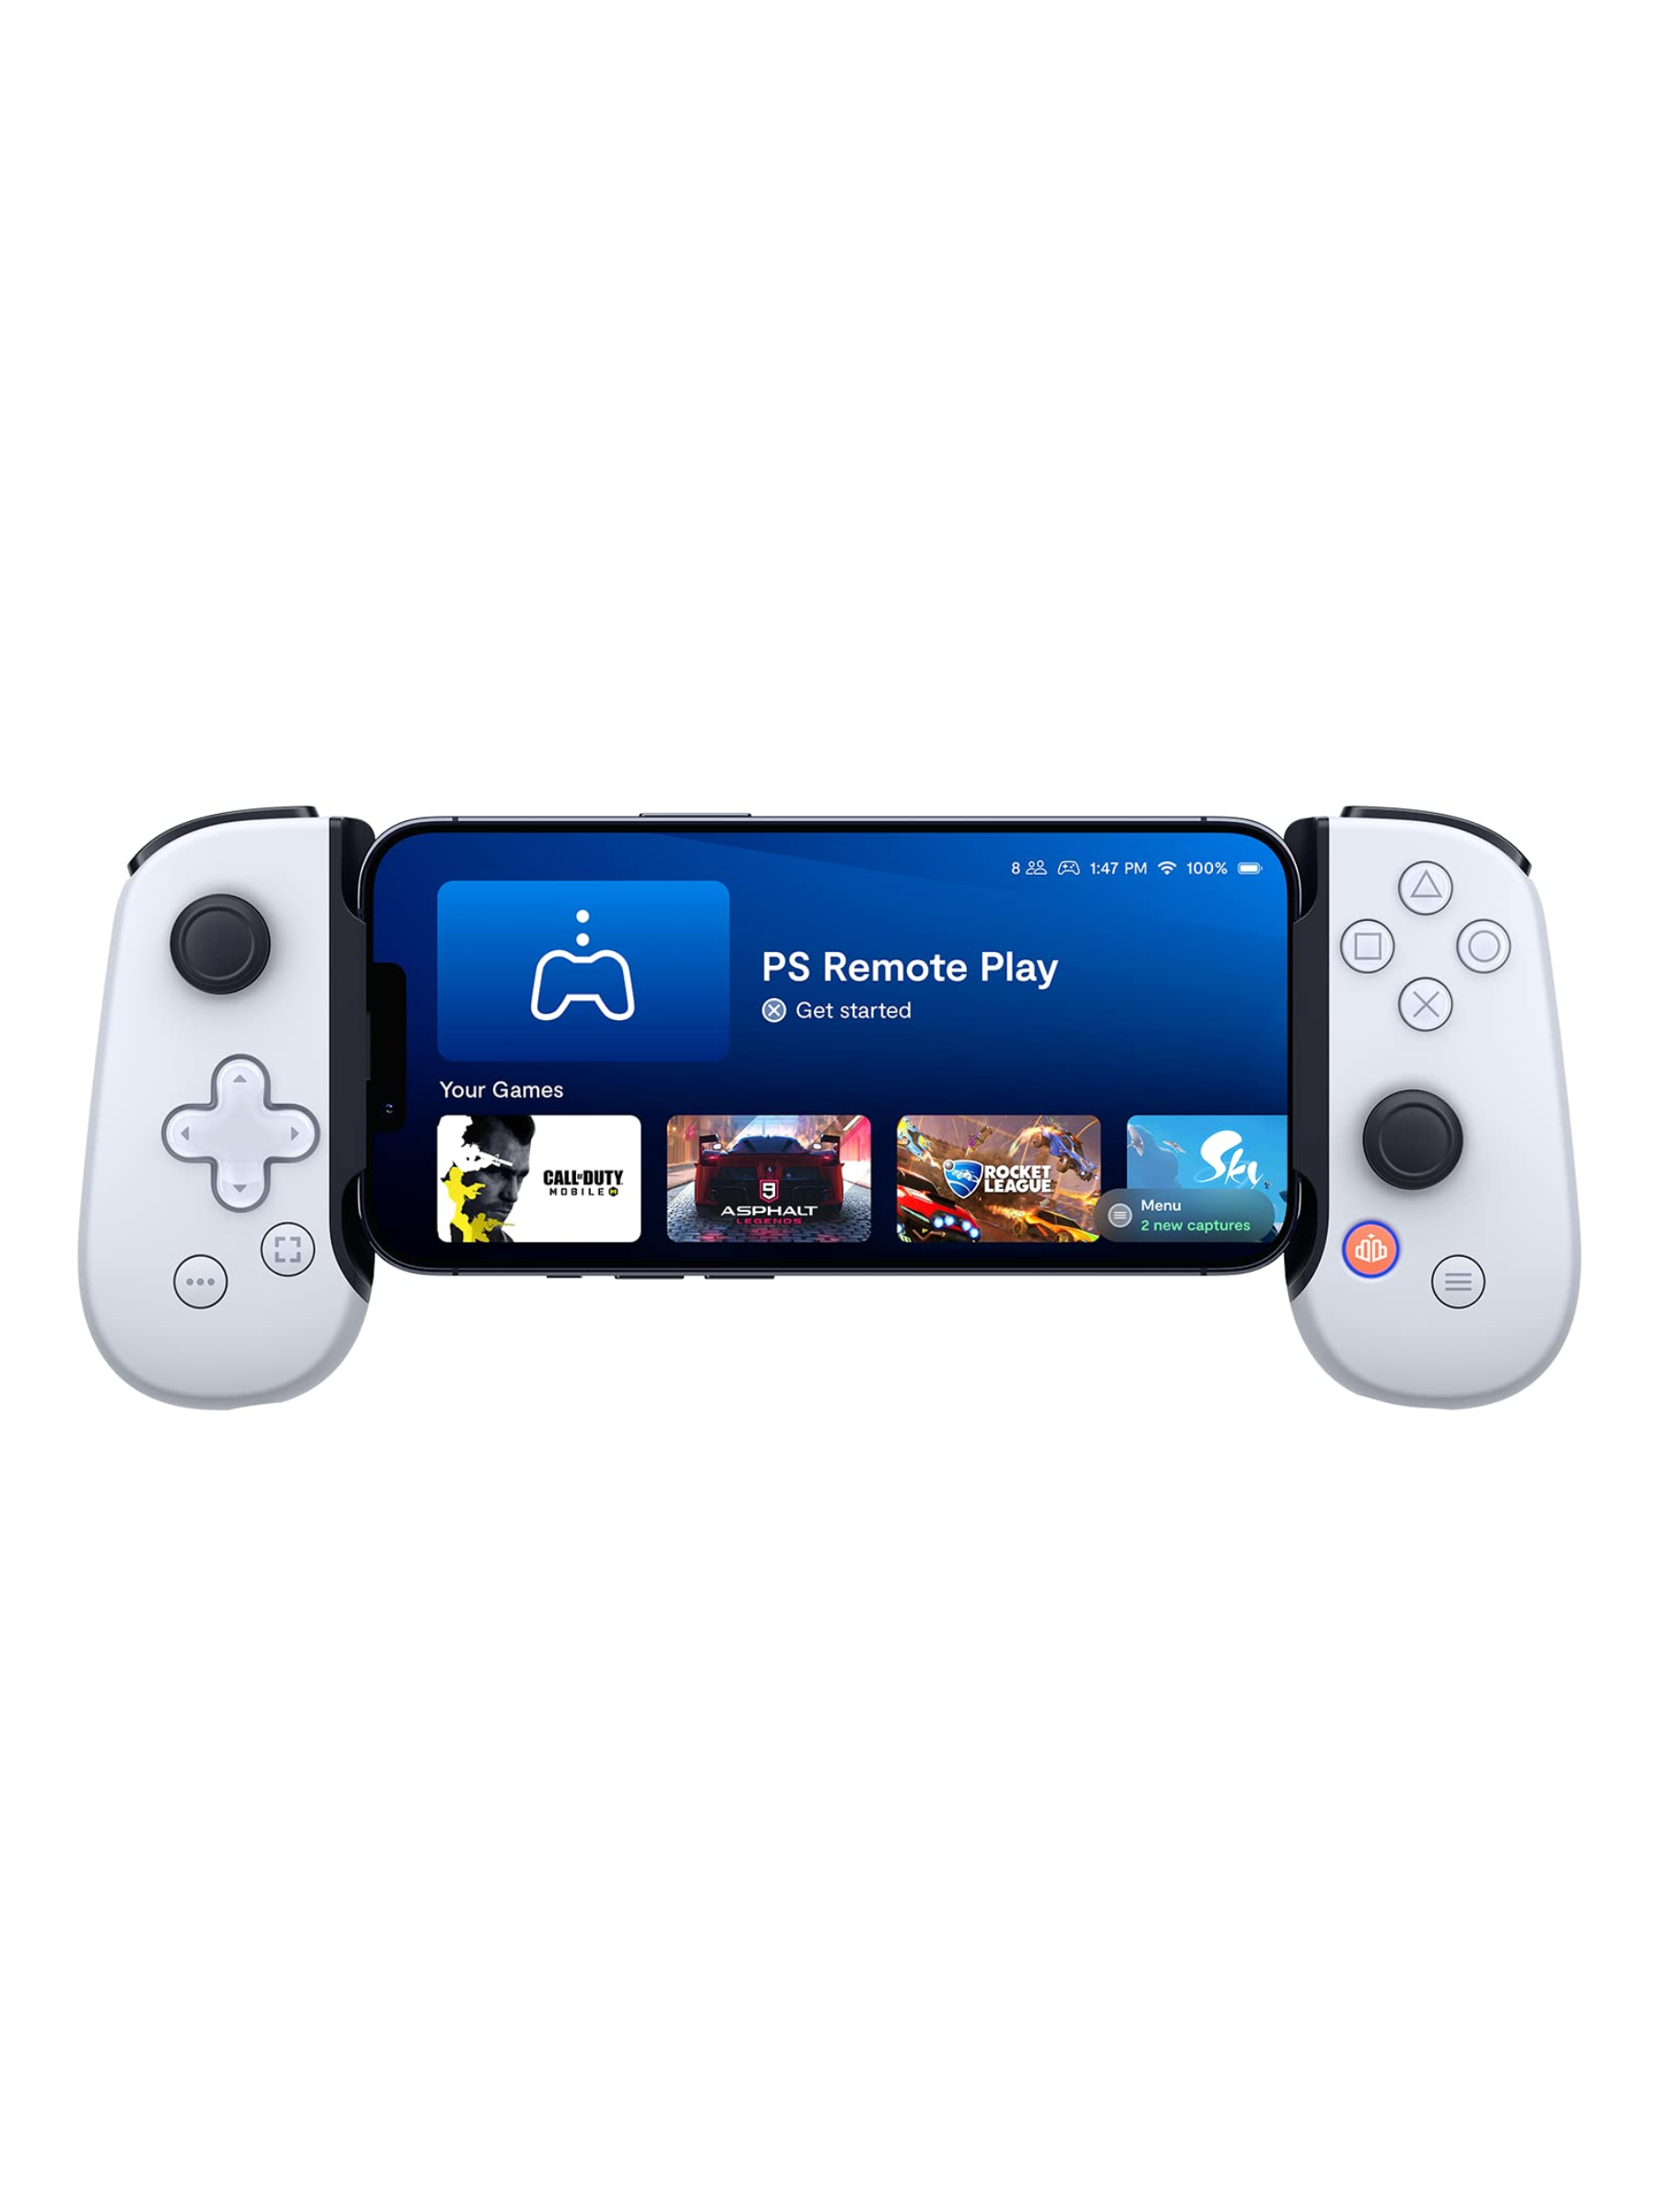 Gamers who can’t go too long without getting some play time in will appreciate this portable controller that syncs their phone to their gaming system for uninterrupted NBA2K or Call of Duty sessions. $100, Amazon. <a href="https://www.amazon.com/dp/B09ZXTRKQ9?ref_=cm_sw_r_cp_ud_dp_EAXJRB0ABQ1FRKRCXE80">Get it now!</a><p>Sign up for today’s biggest stories, from pop culture to politics.</p><a href="https://www.glamour.com/newsletter/news?sourceCode=msnsend">Sign Up</a>